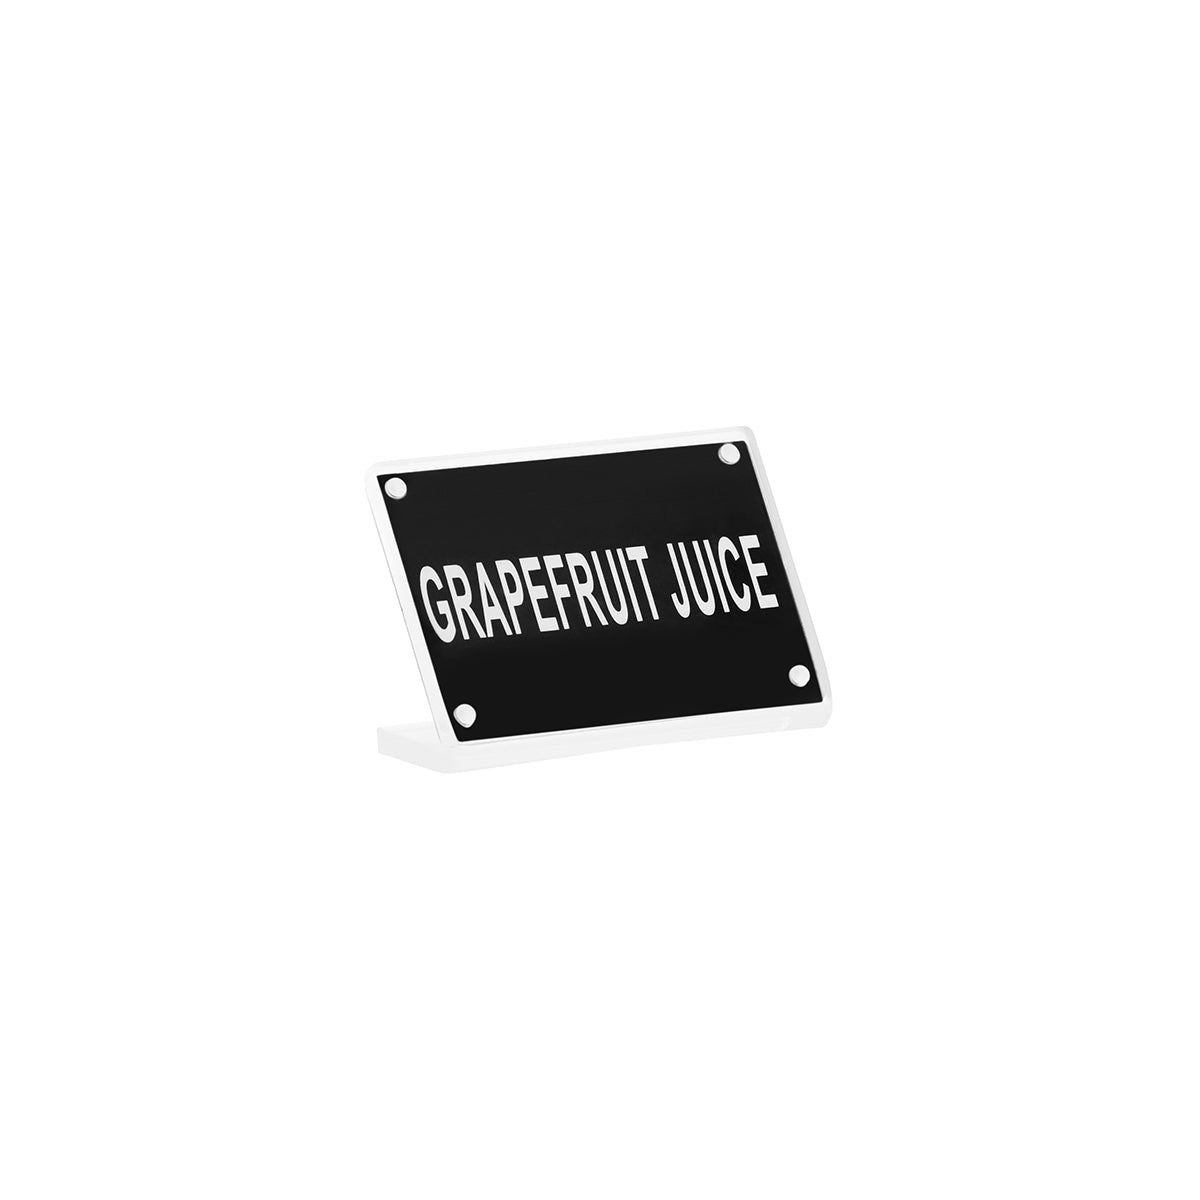 81327 Chef Inox Buffet Sign Acrylic with Magnet Plate - Grapefruit Juice Tomkin Australia Hospitality Supplies